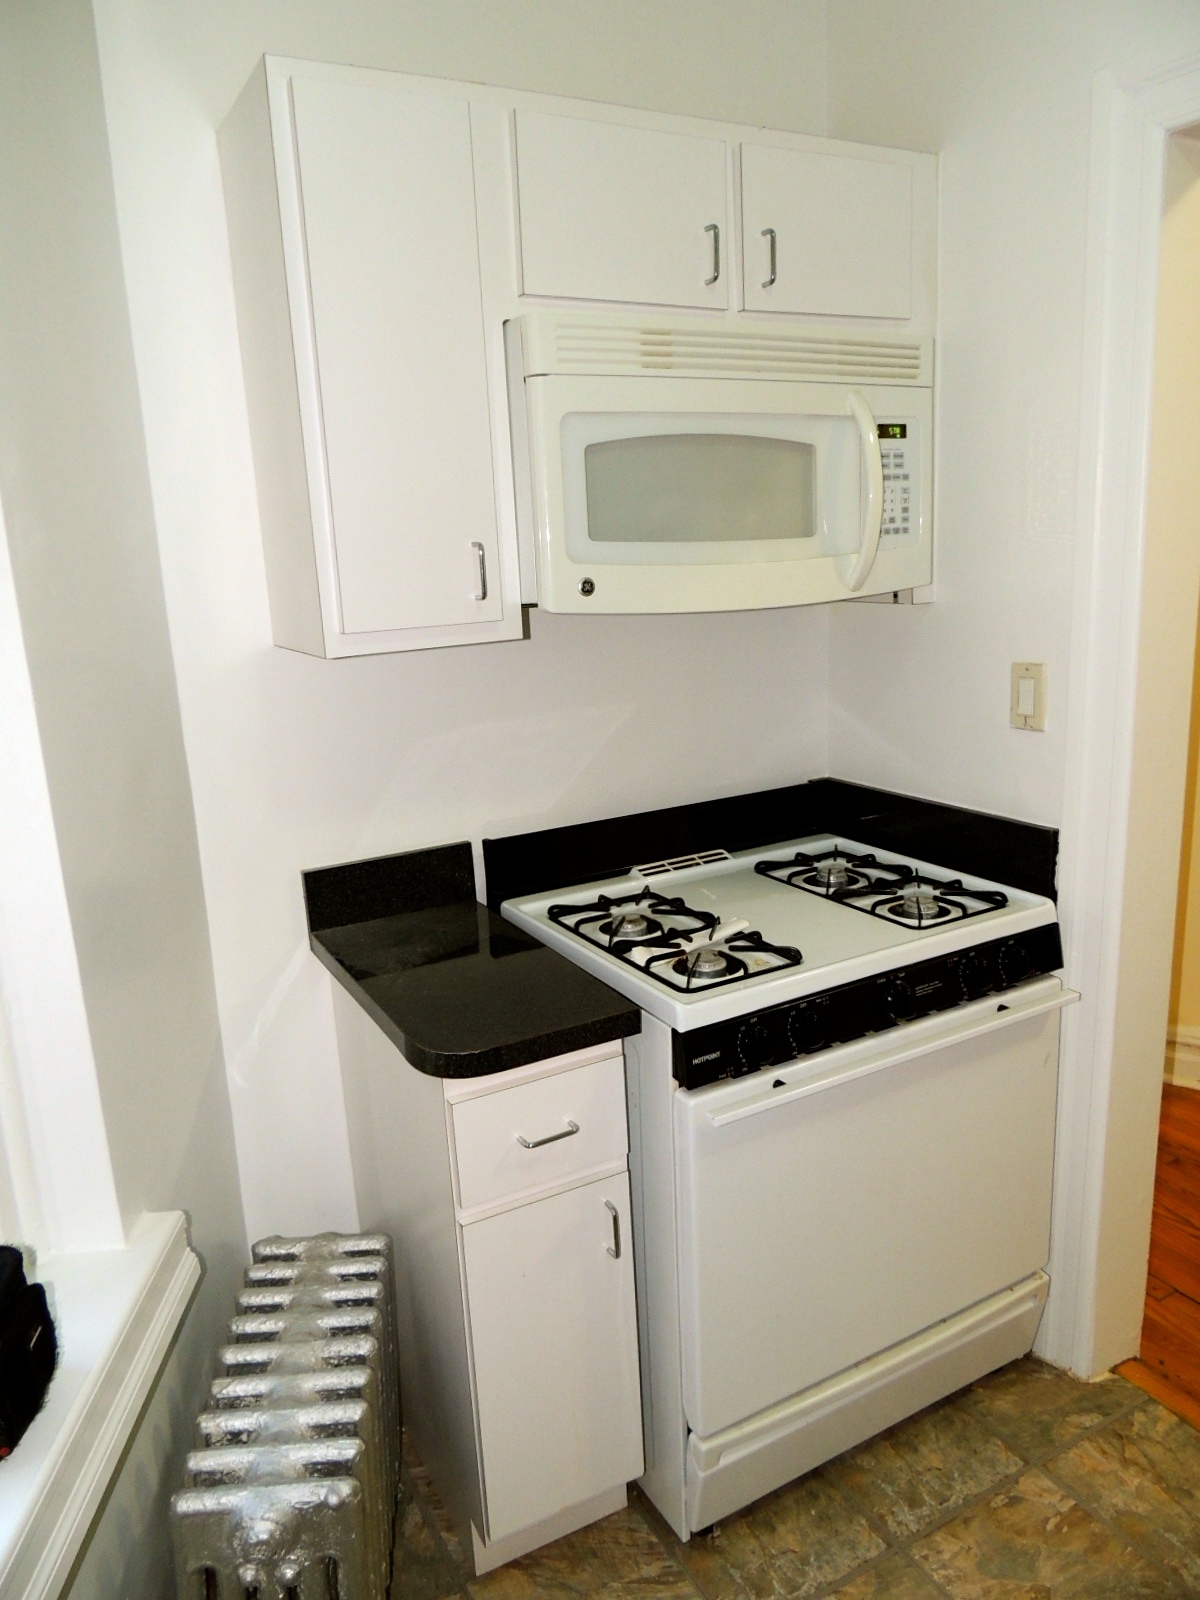 Apartment in Sunnyside - 48th Street  Queens, NY 11104